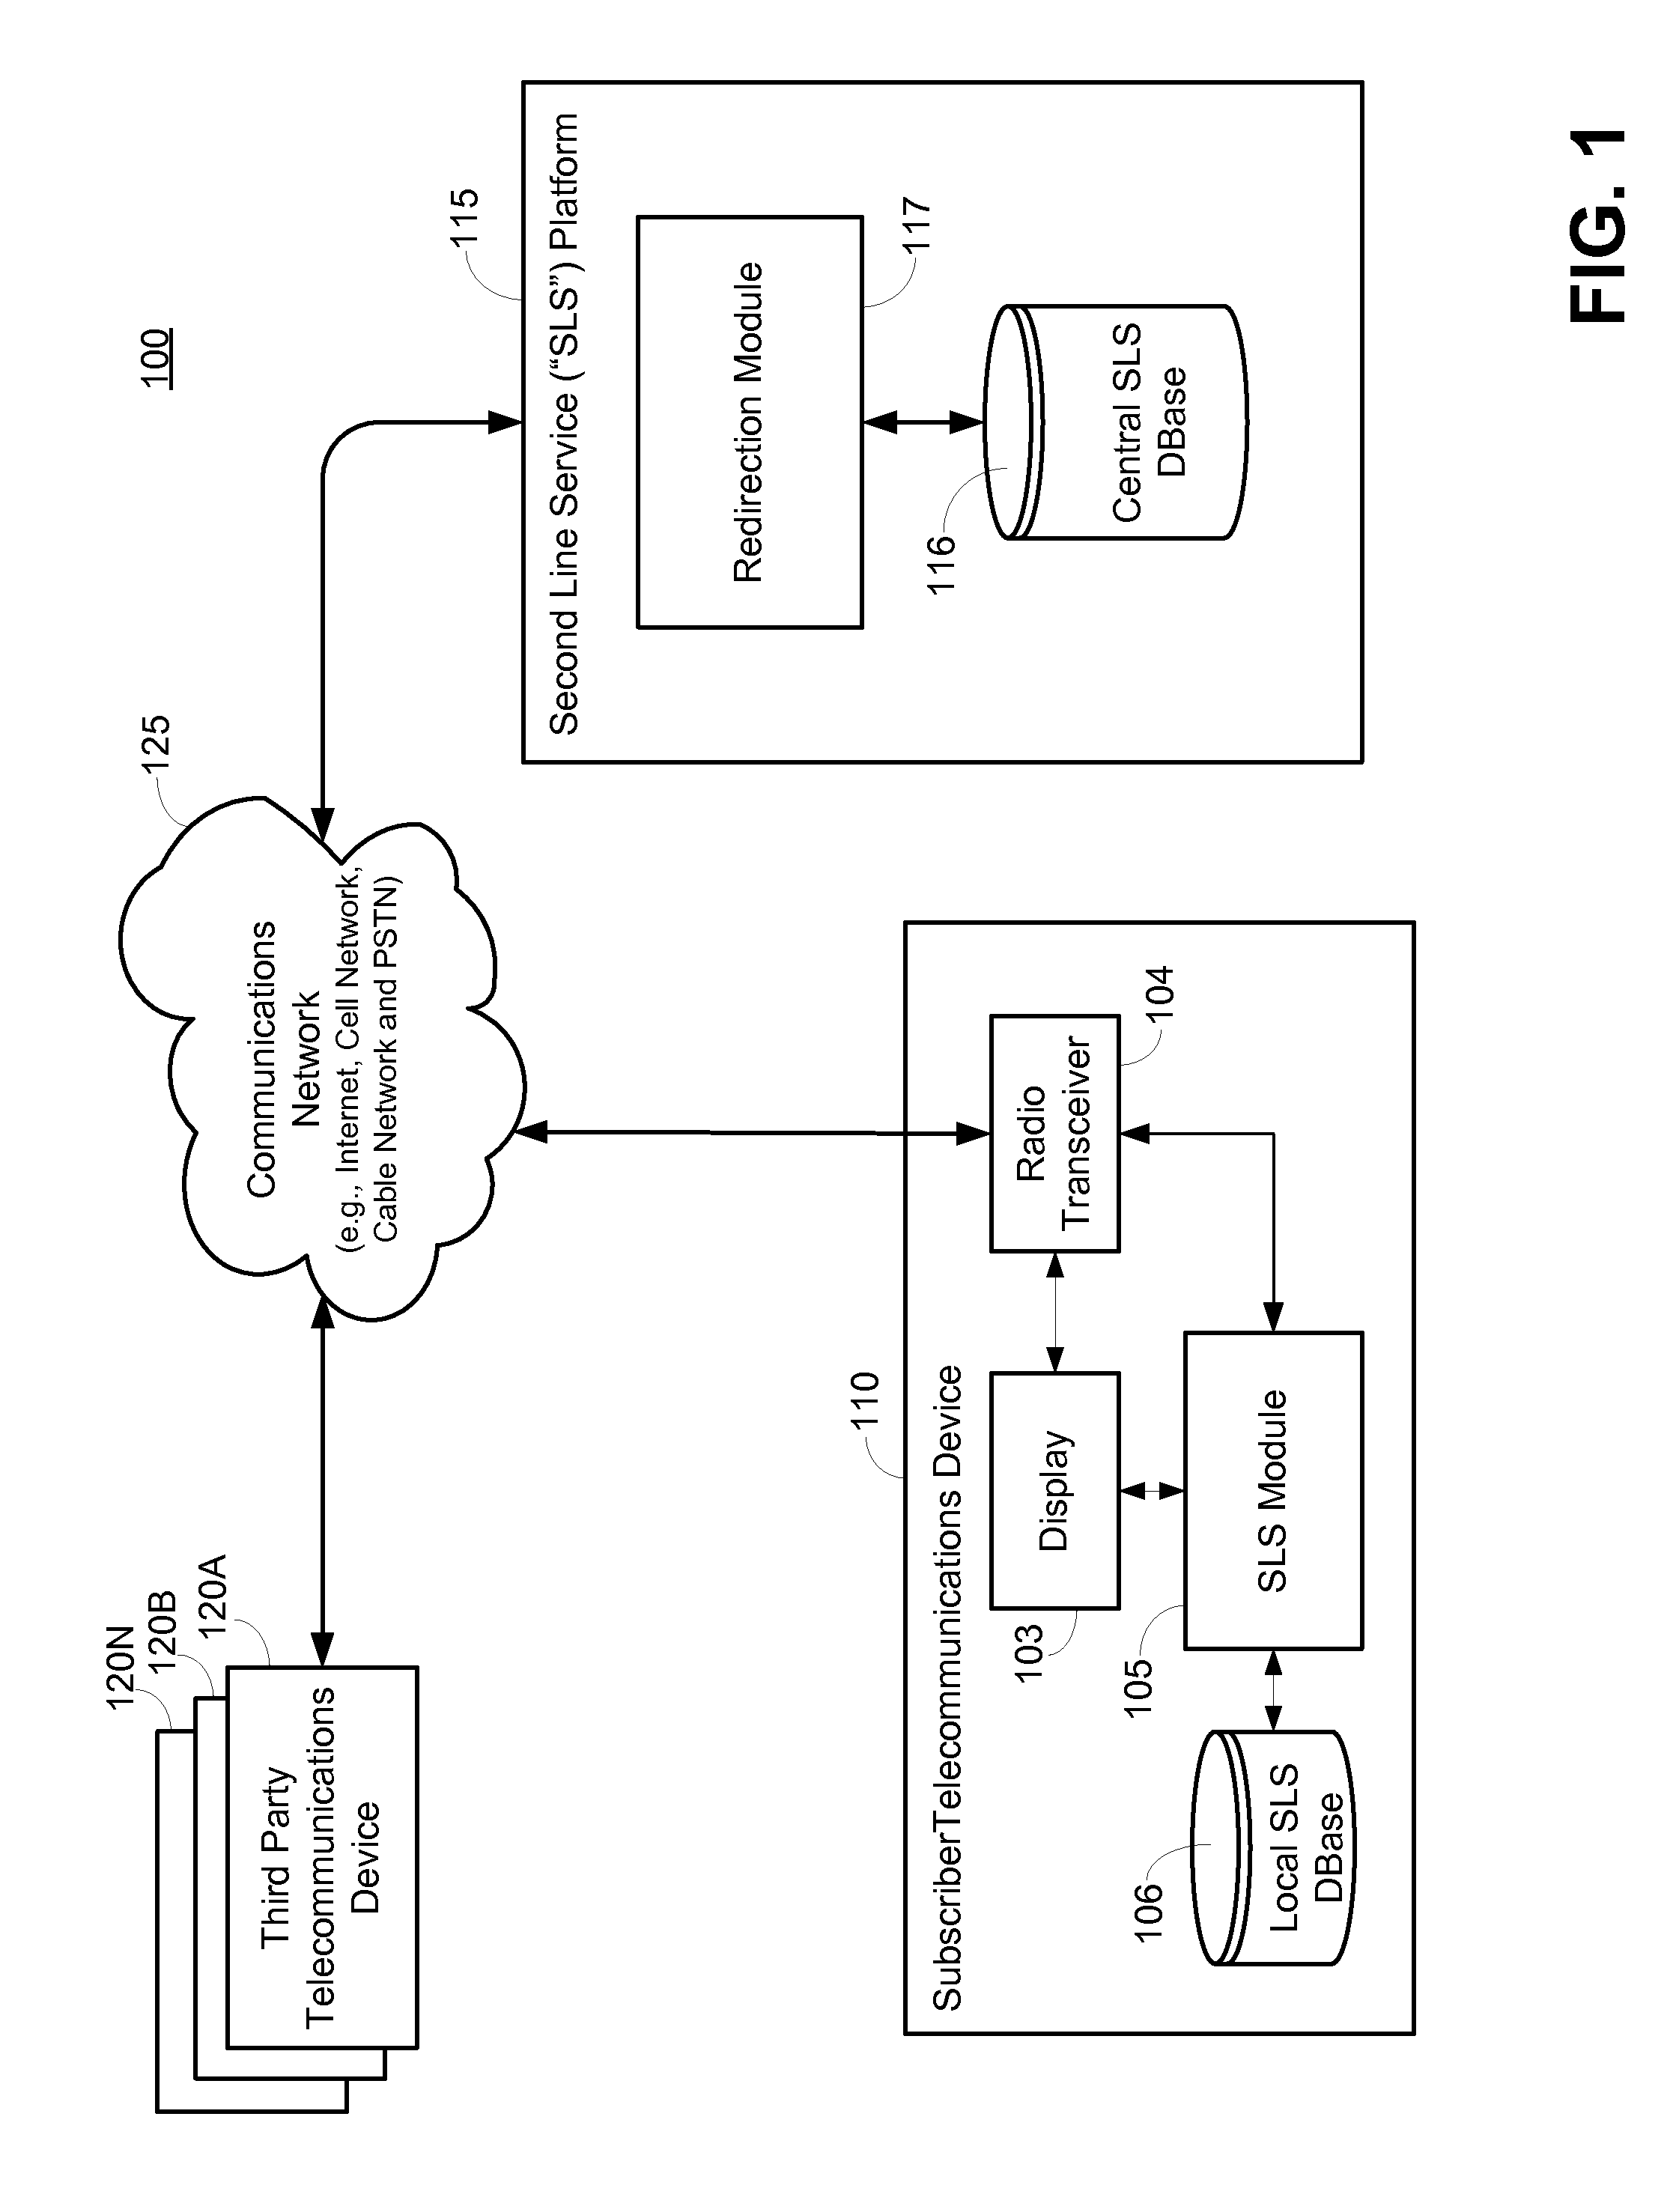 System and Method for Provision of a Second Line Service to a Telecommunications Device using Mixed Protocols